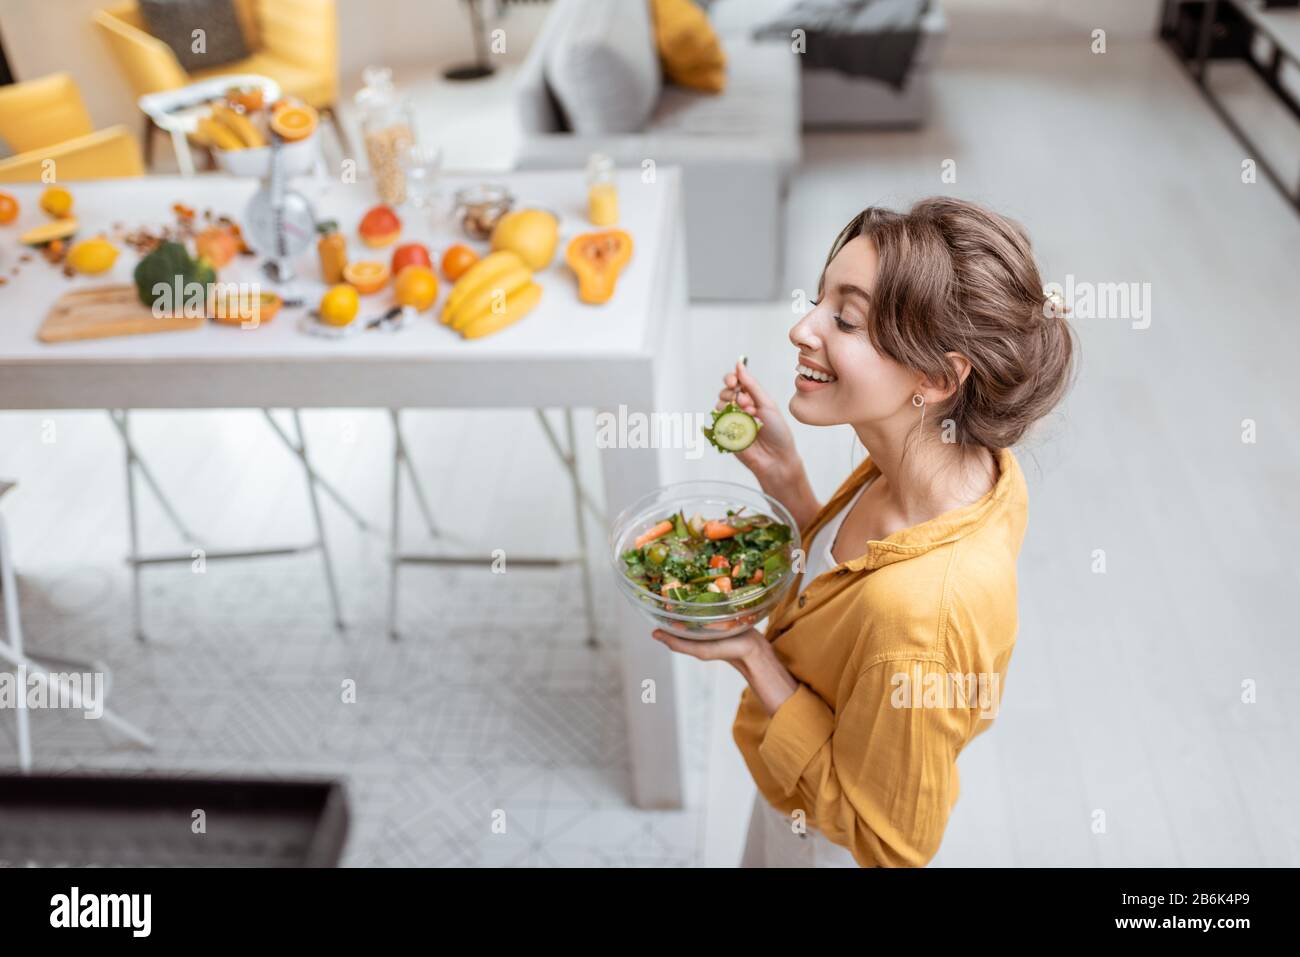 Portrait of a young and cheerful woman dressed in bright shirt eating salad at home. Concept of wellbeing, healthy food and homeliness Stock Photo